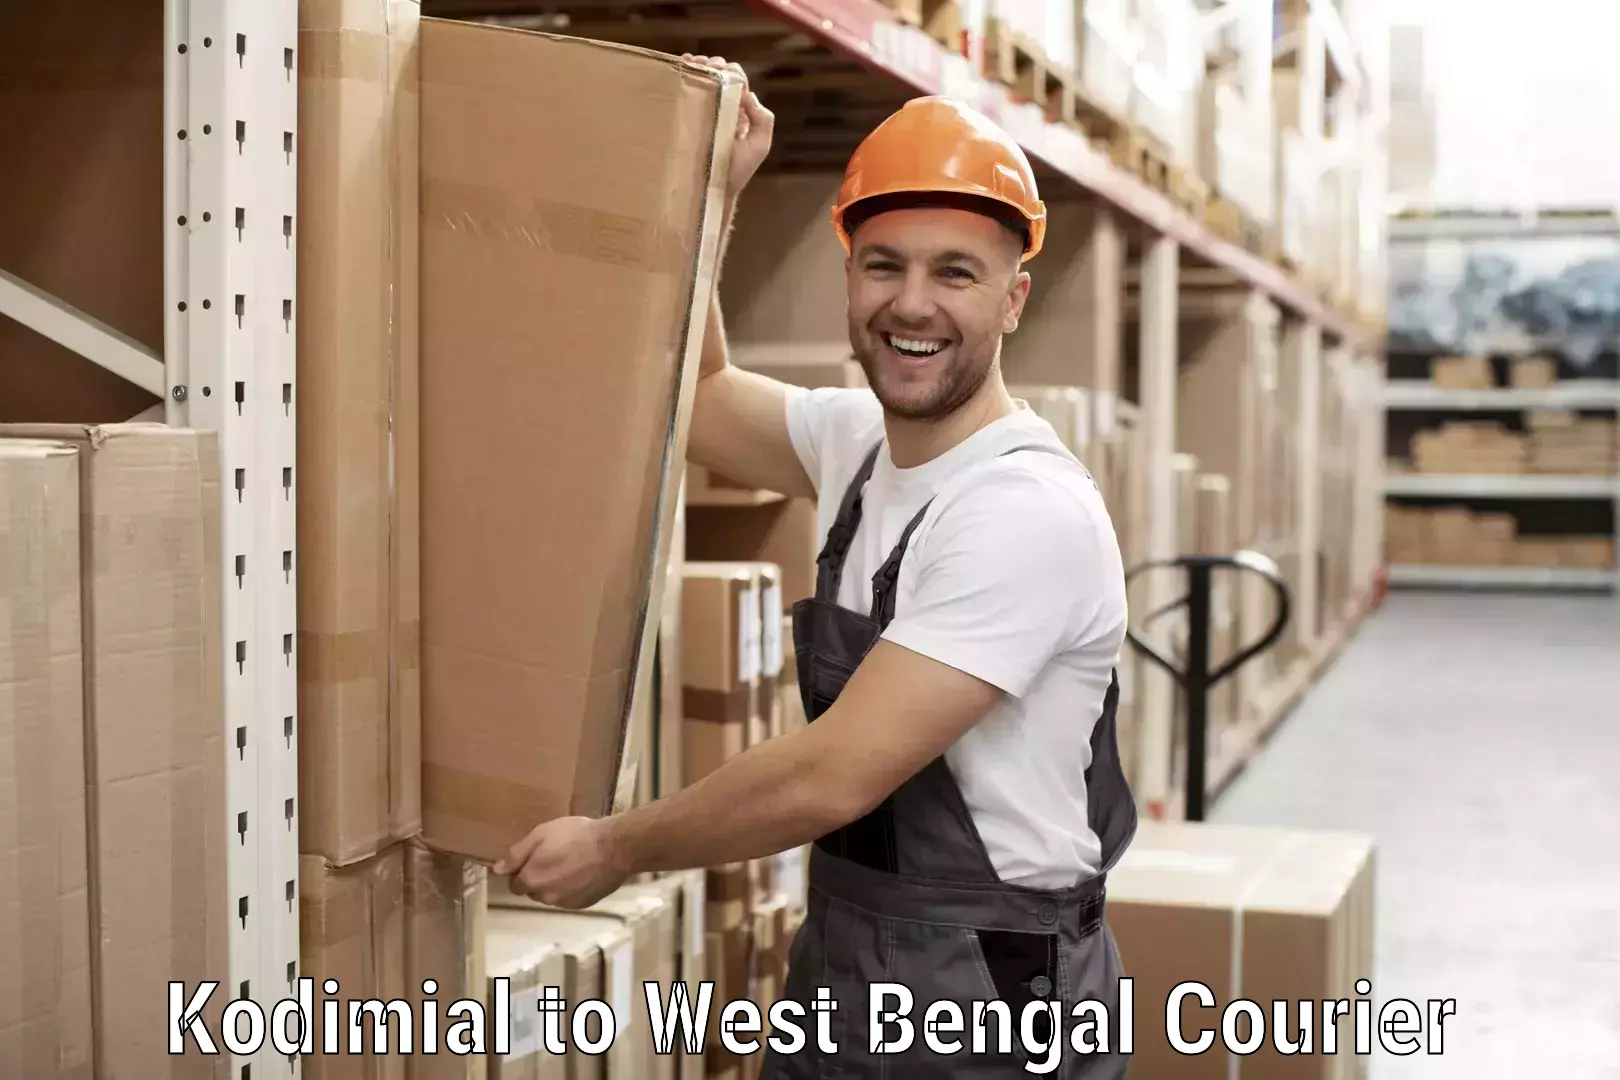 24/7 courier service in Kodimial to West Bengal